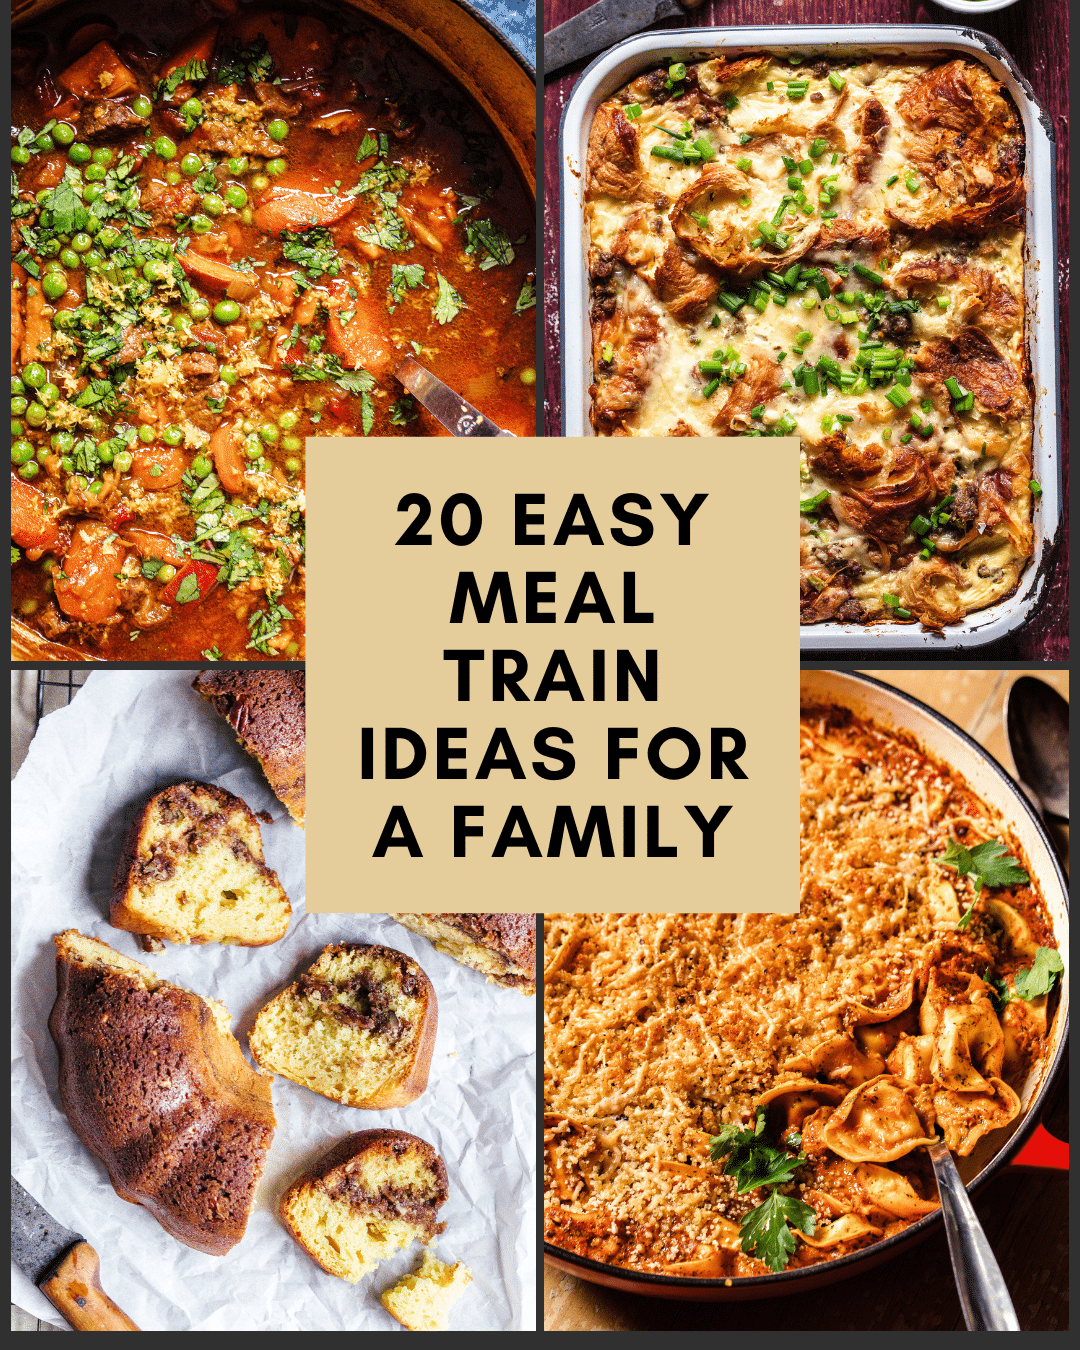 Our 20 Most Popular Meal Train Ideas for a Family